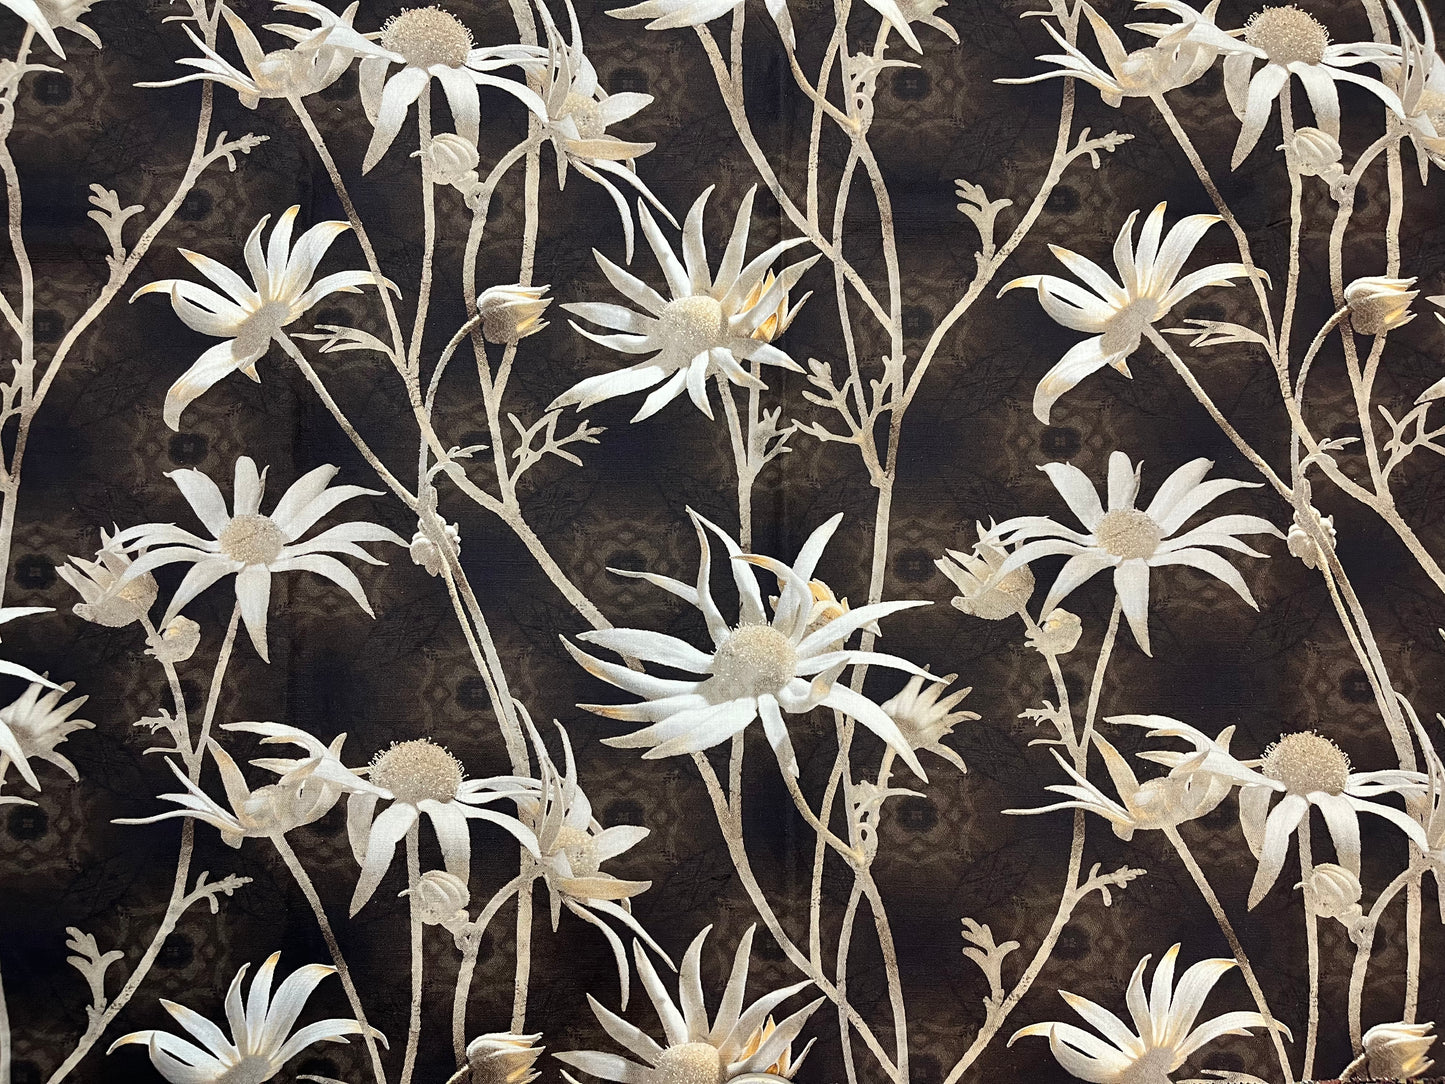 MS CHIEF DESIGNS Earth Flannel Flowers in Linen